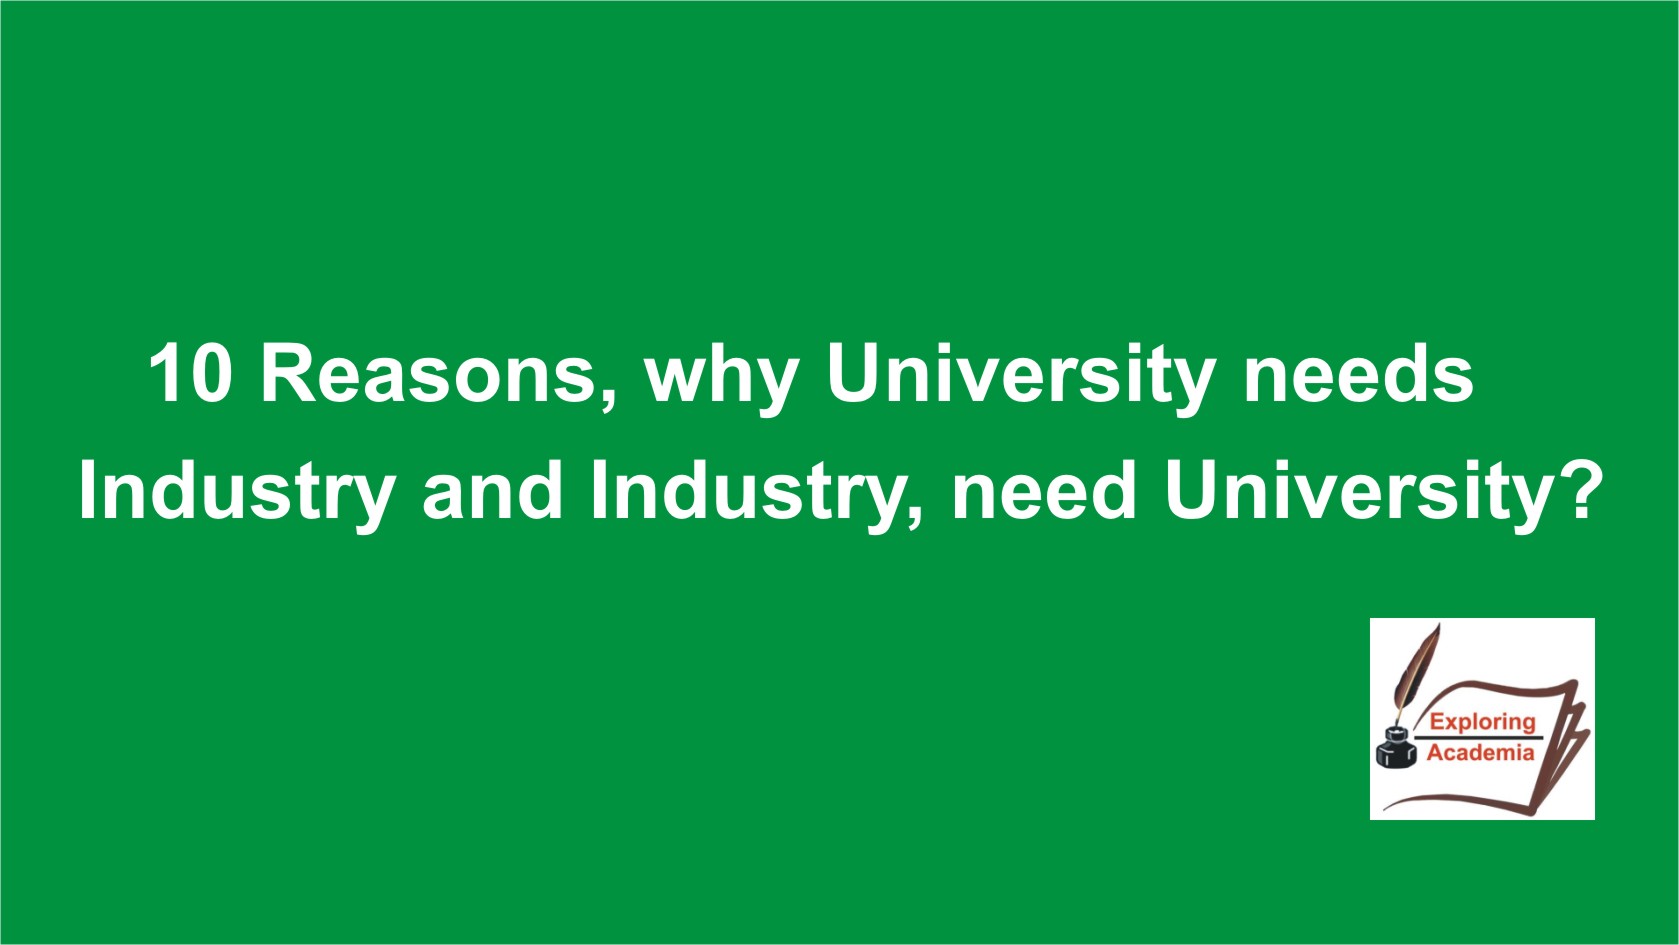 10 Reasons, why University needs Industry and Industry, needs University?